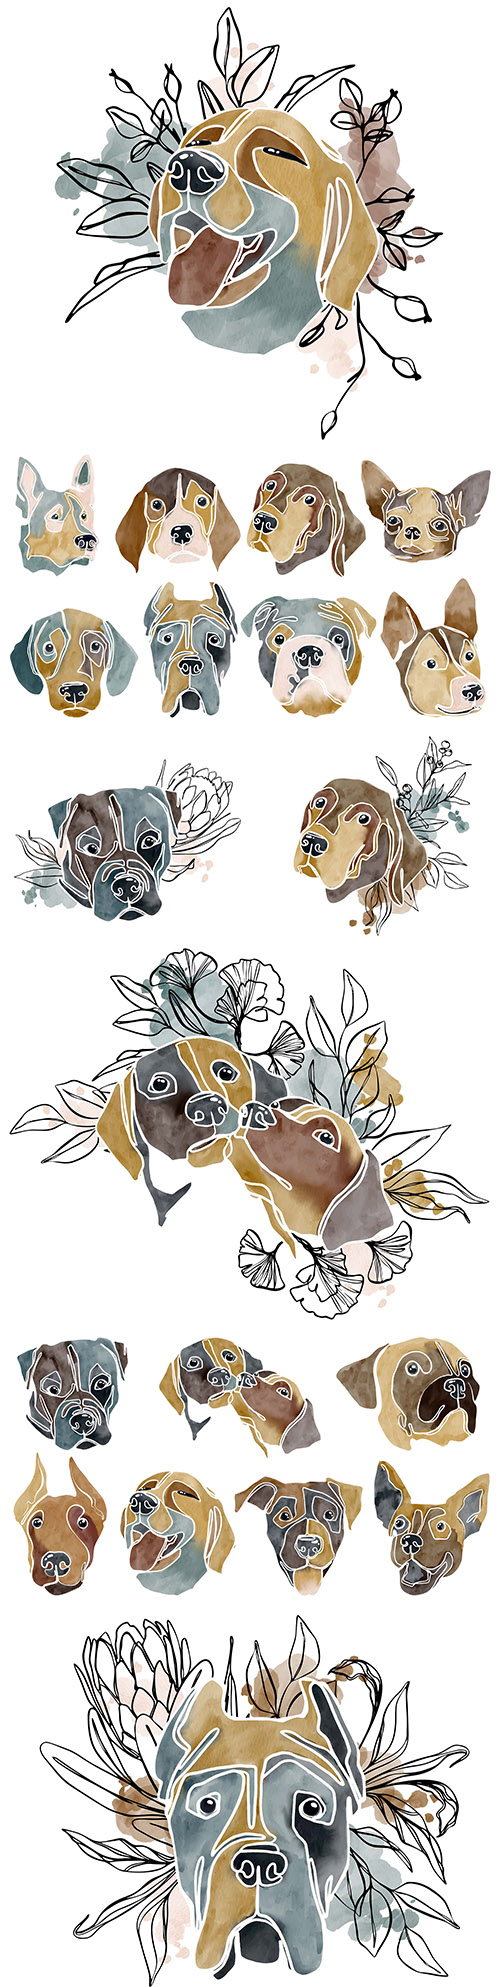 Dogs of different breeds abstract illustrations
